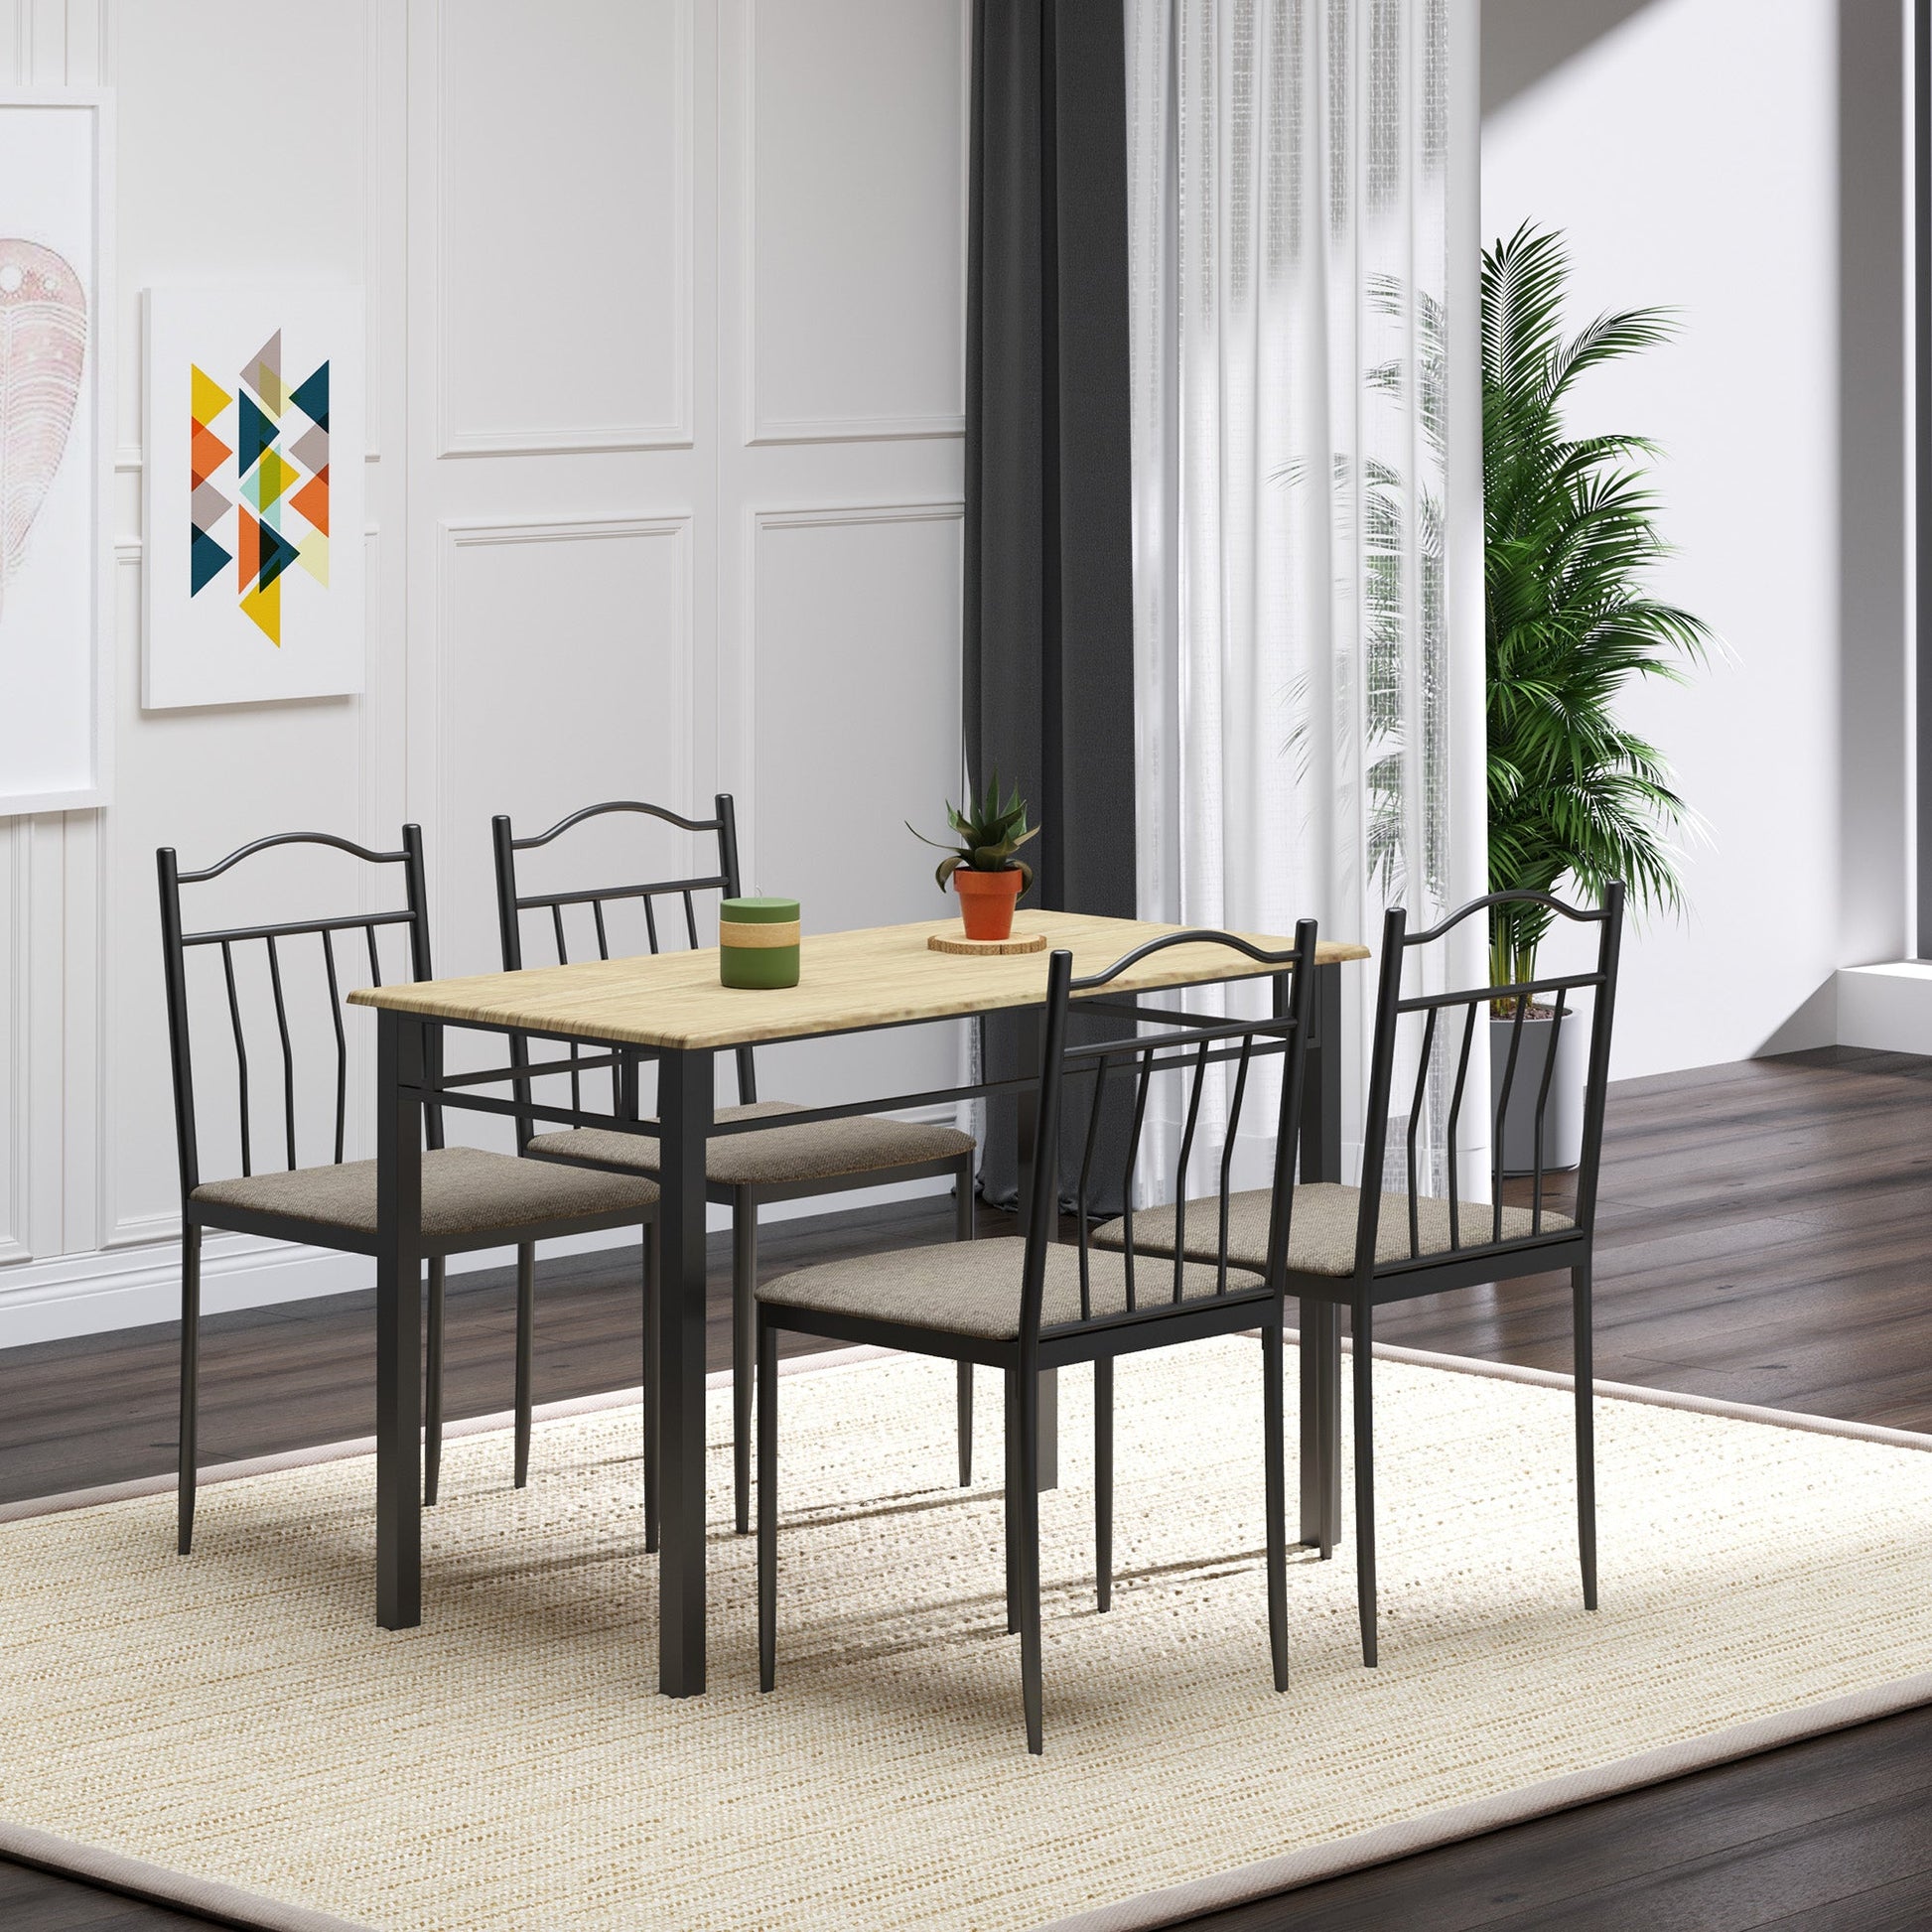 5 Piece Dining Table and Chairs Set Wood Top Metal Frame Padded Seat Dining Table Set Home Kitchen Dining Room Furniture, Black at Gallery Canada